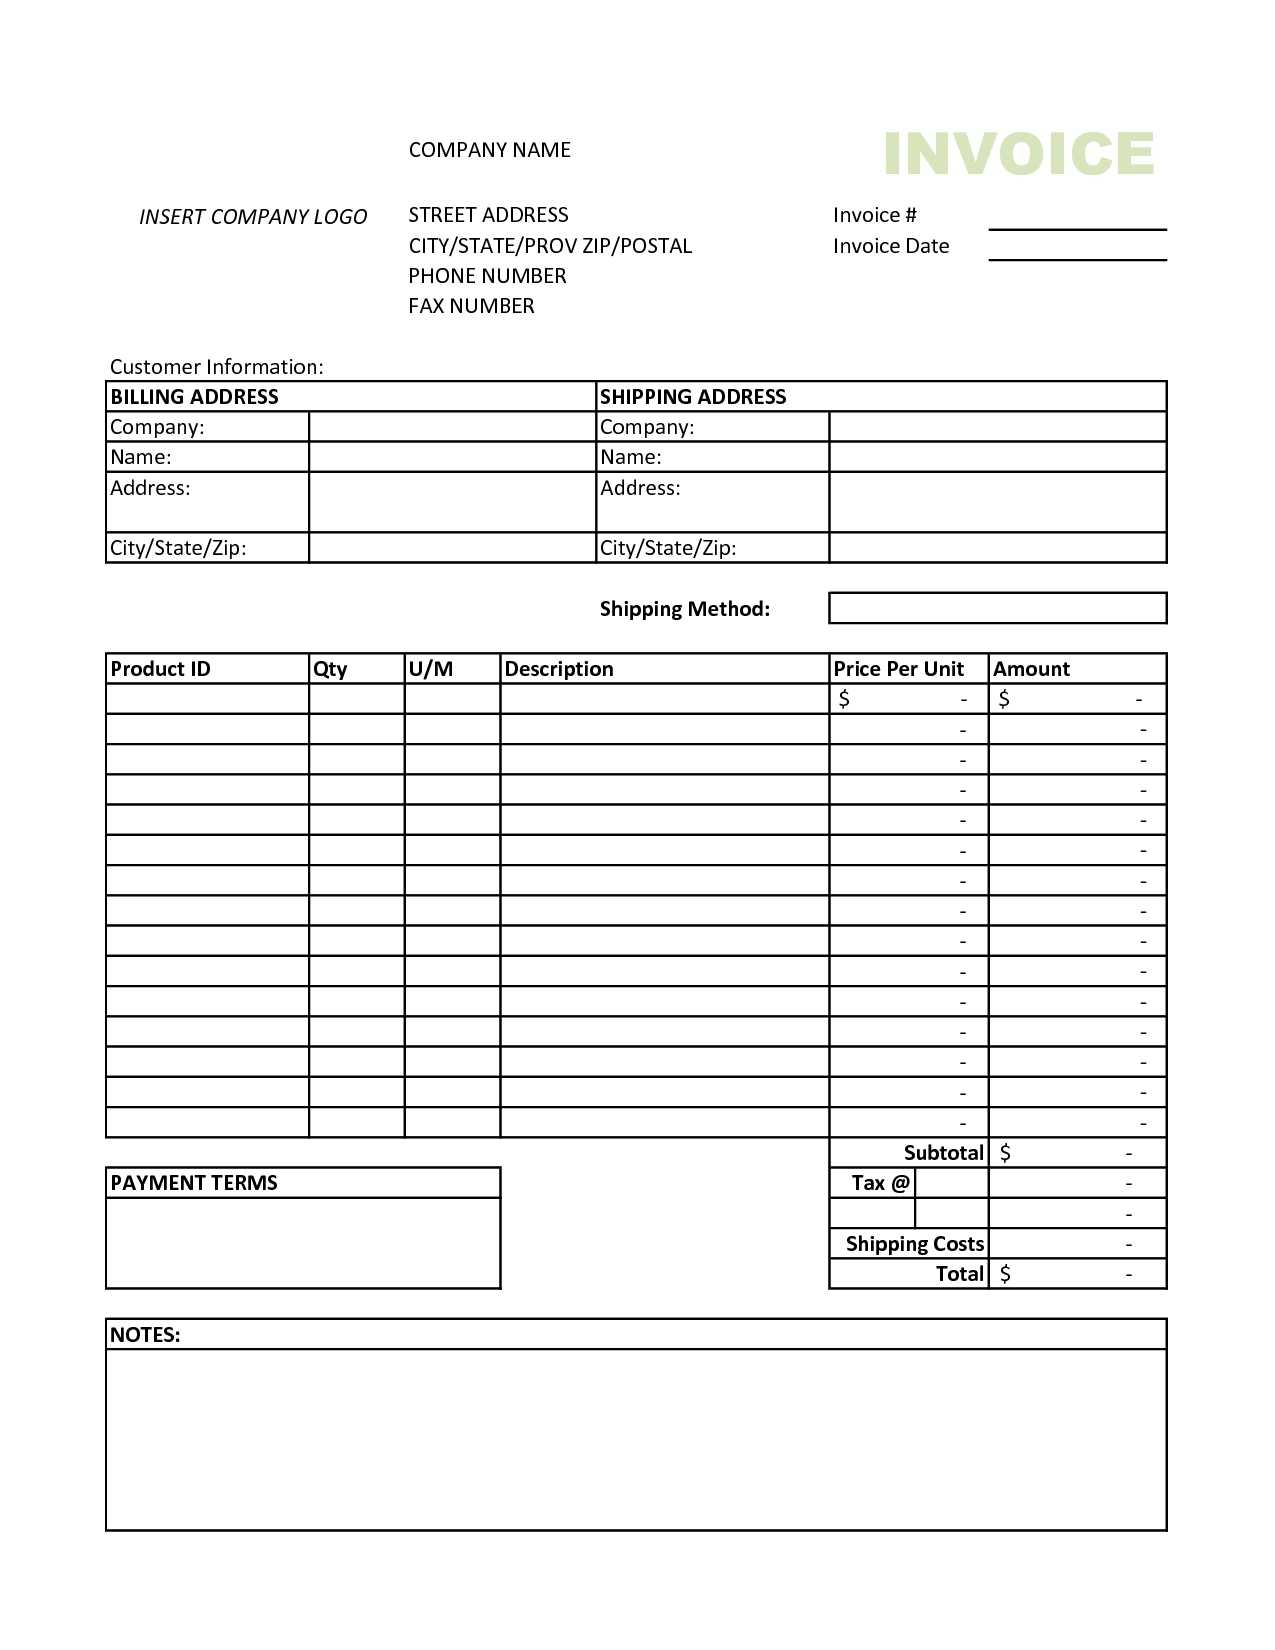 Invoice Template Excel 2010 | Invoice Example In Invoice Template Word 2010